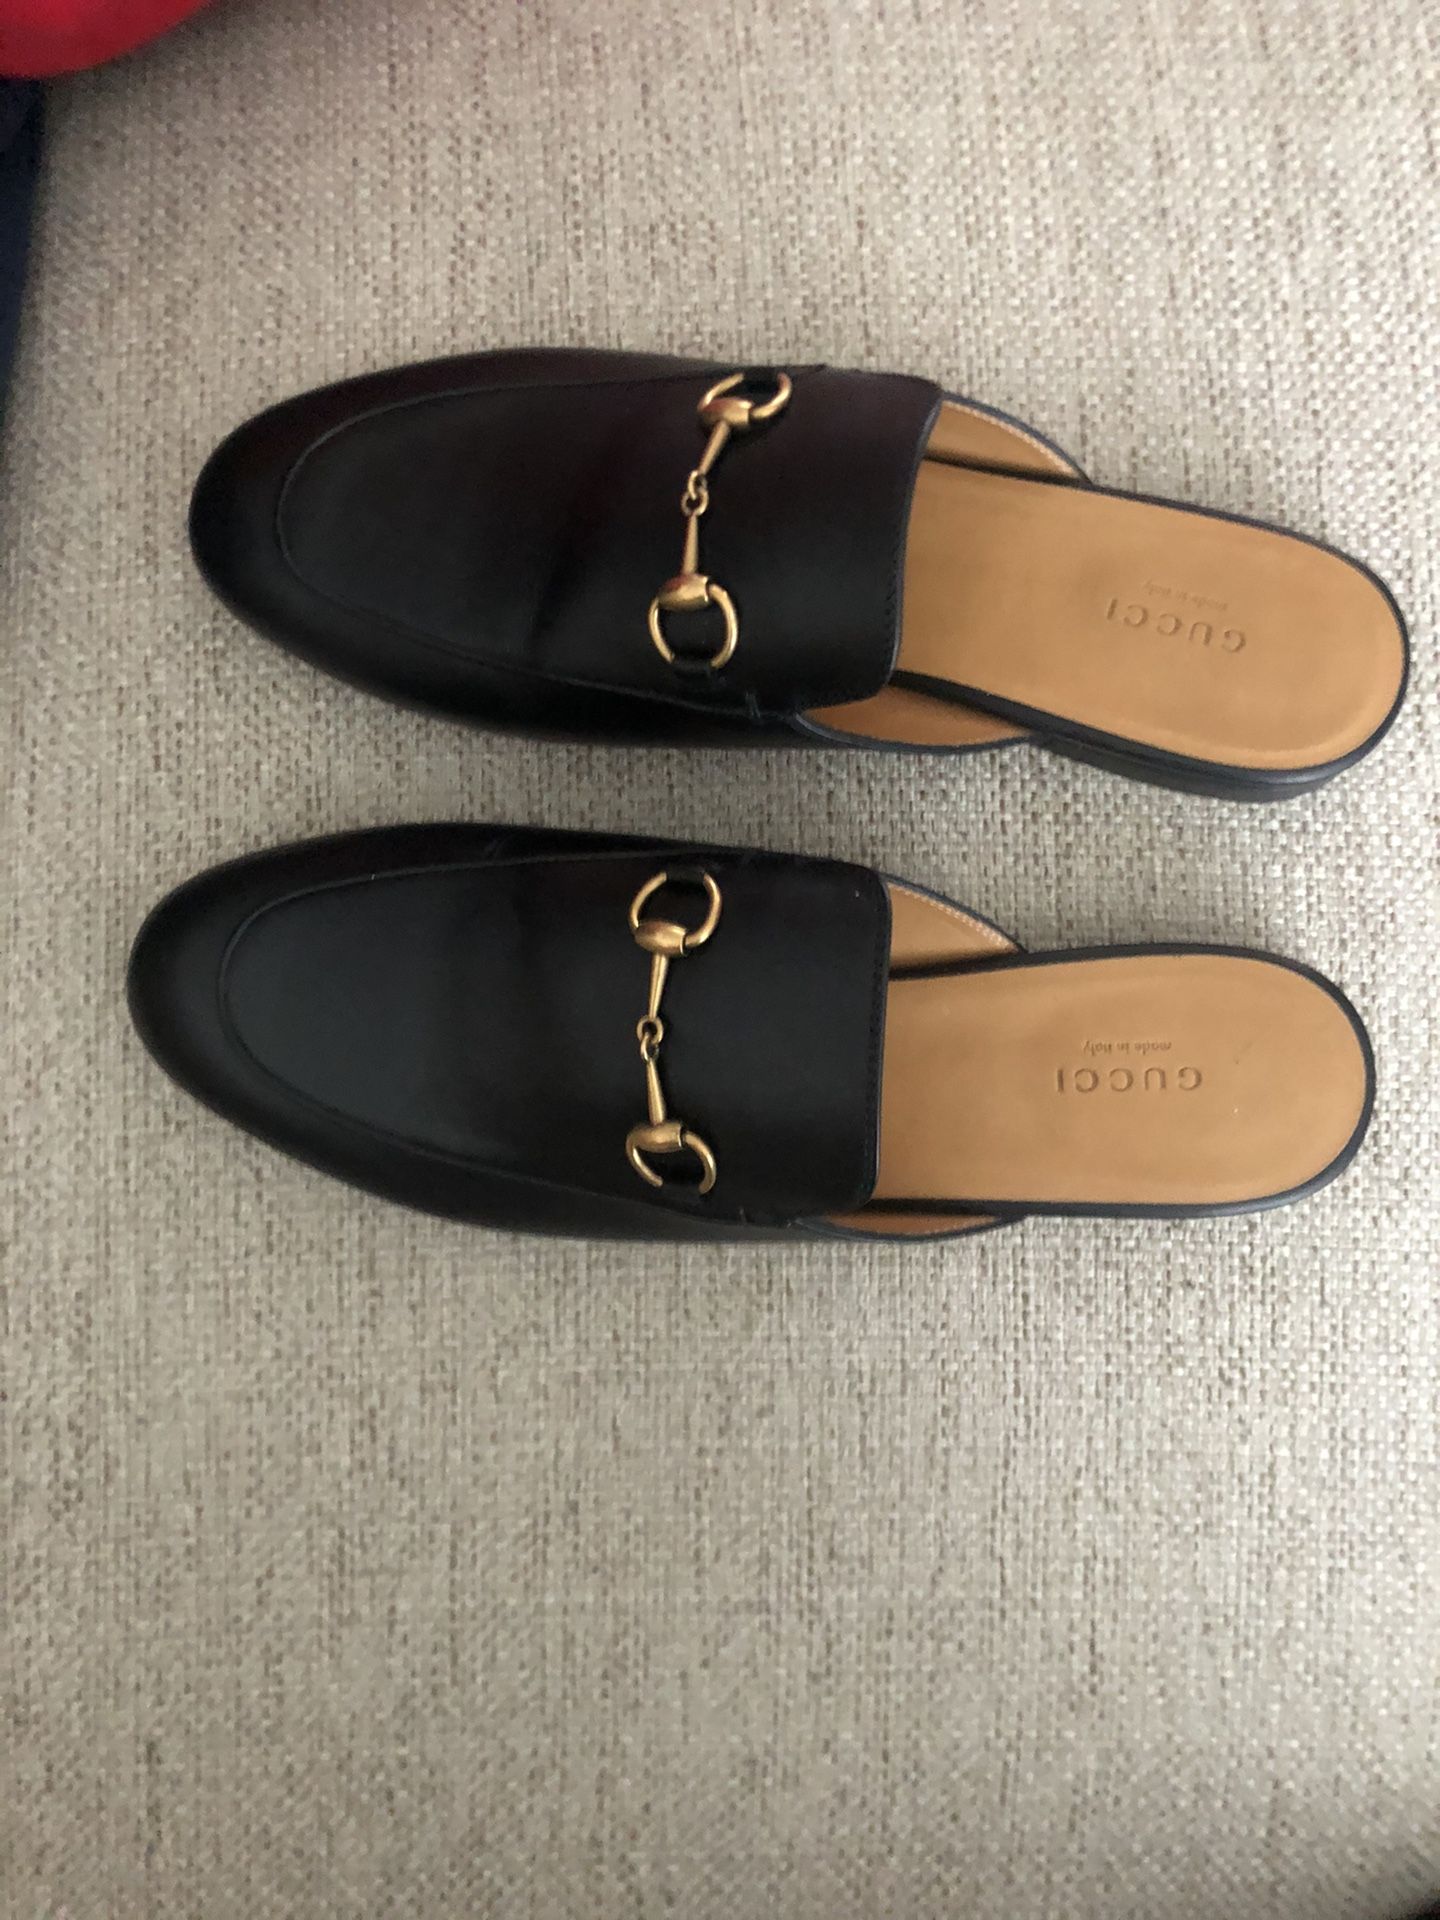 GUCCI Princetown Loafer Mule size 10